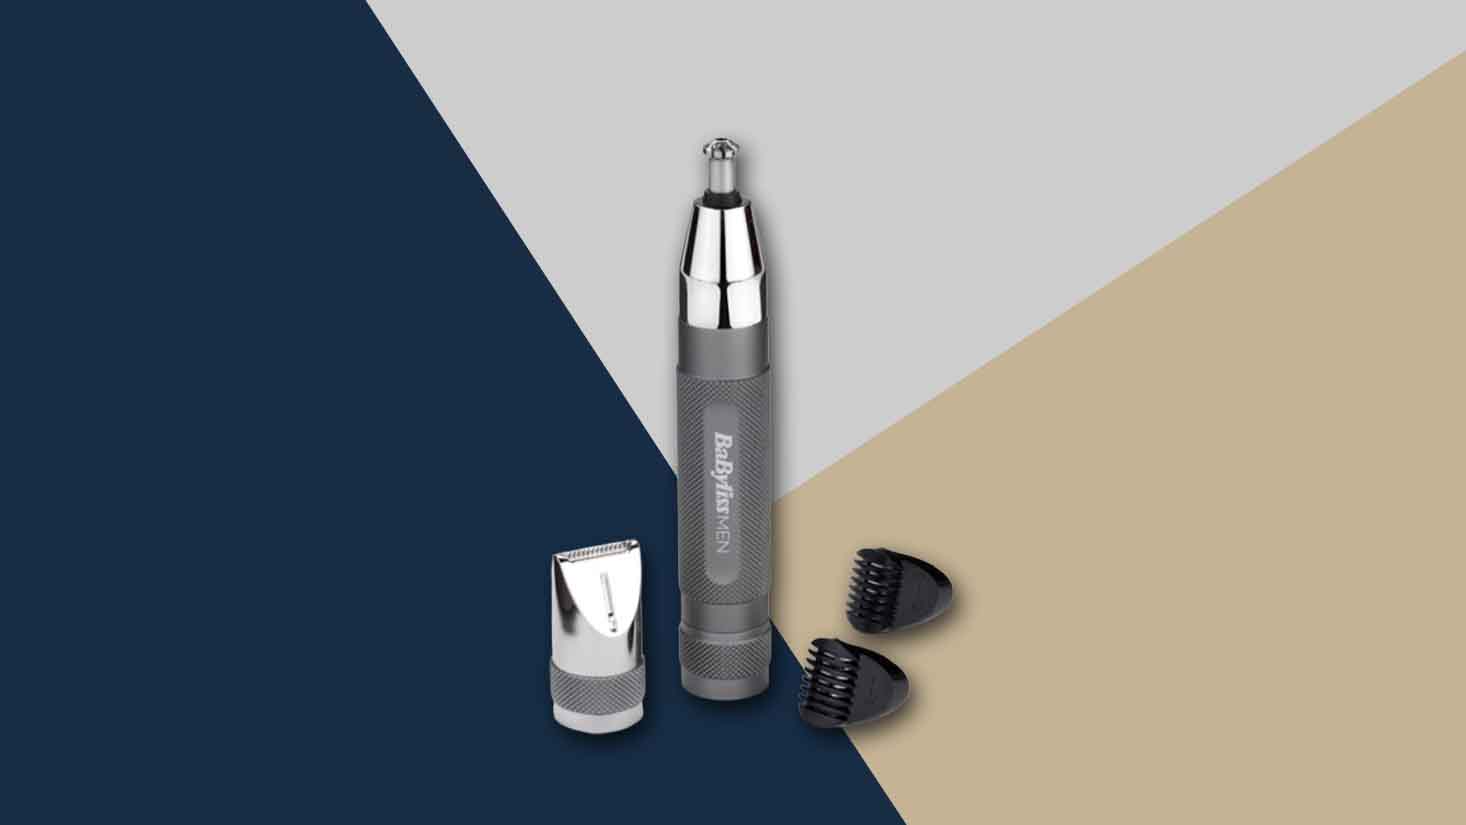 Best nose trimmer for men UK cheap rechargeable and luxury